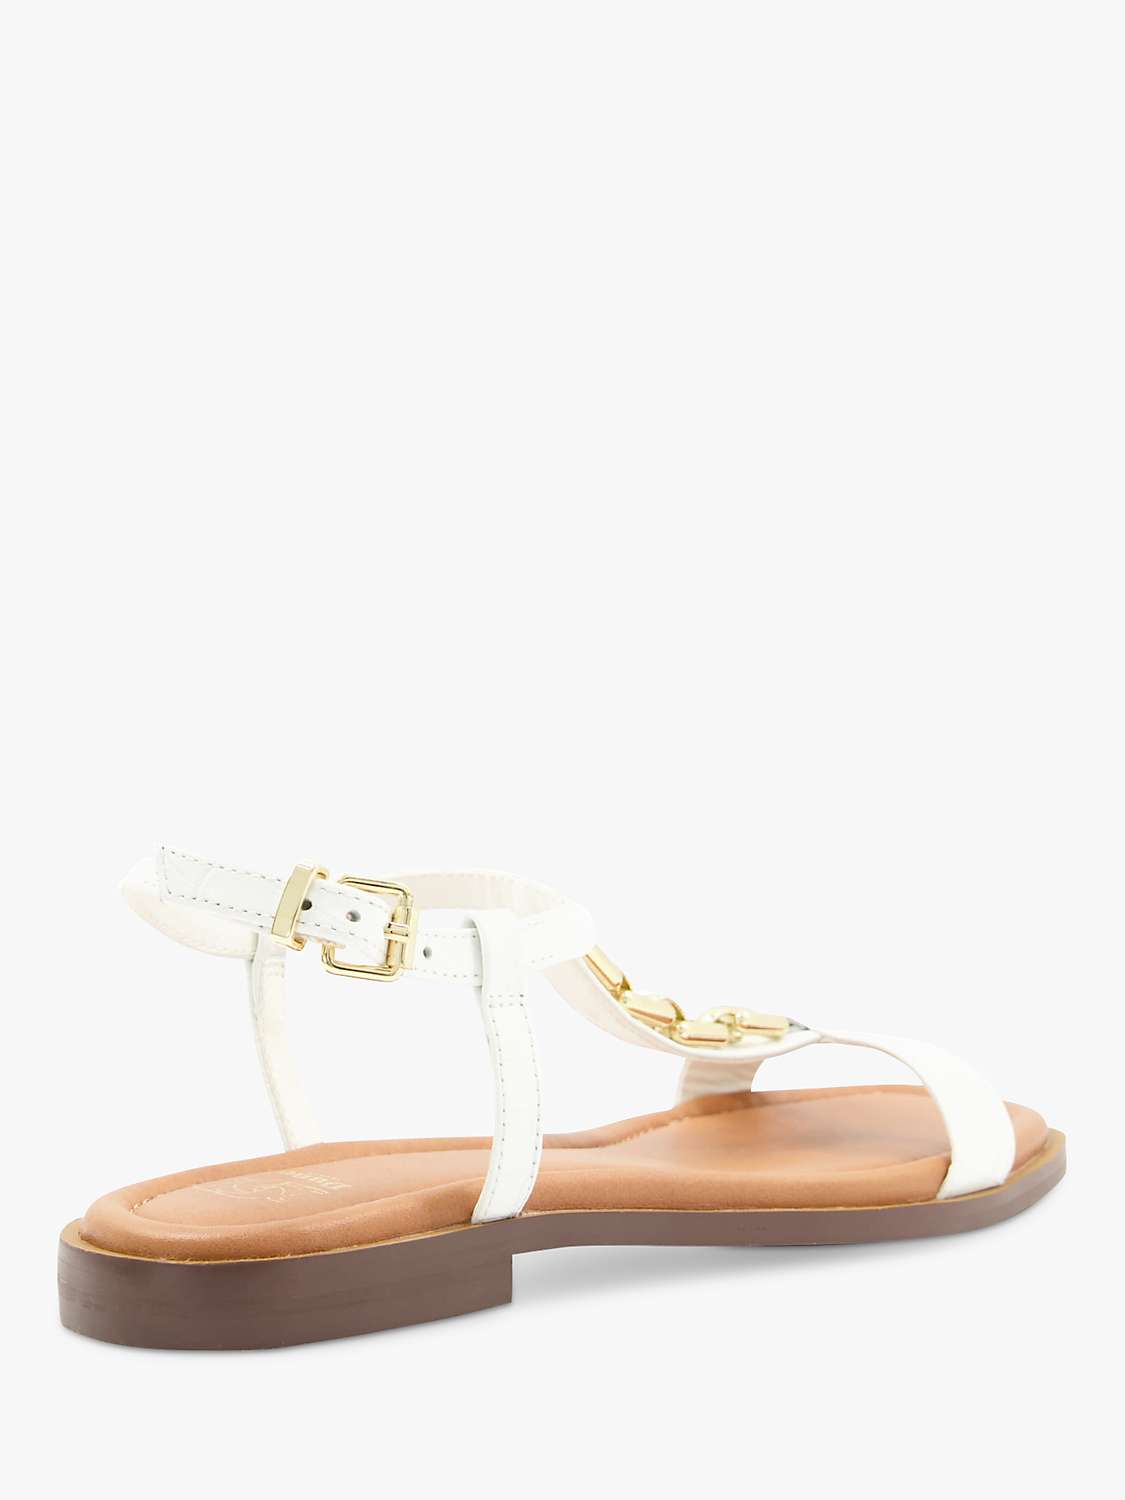 Buy Dune Lotty Chain Leather Sandals, White Online at johnlewis.com